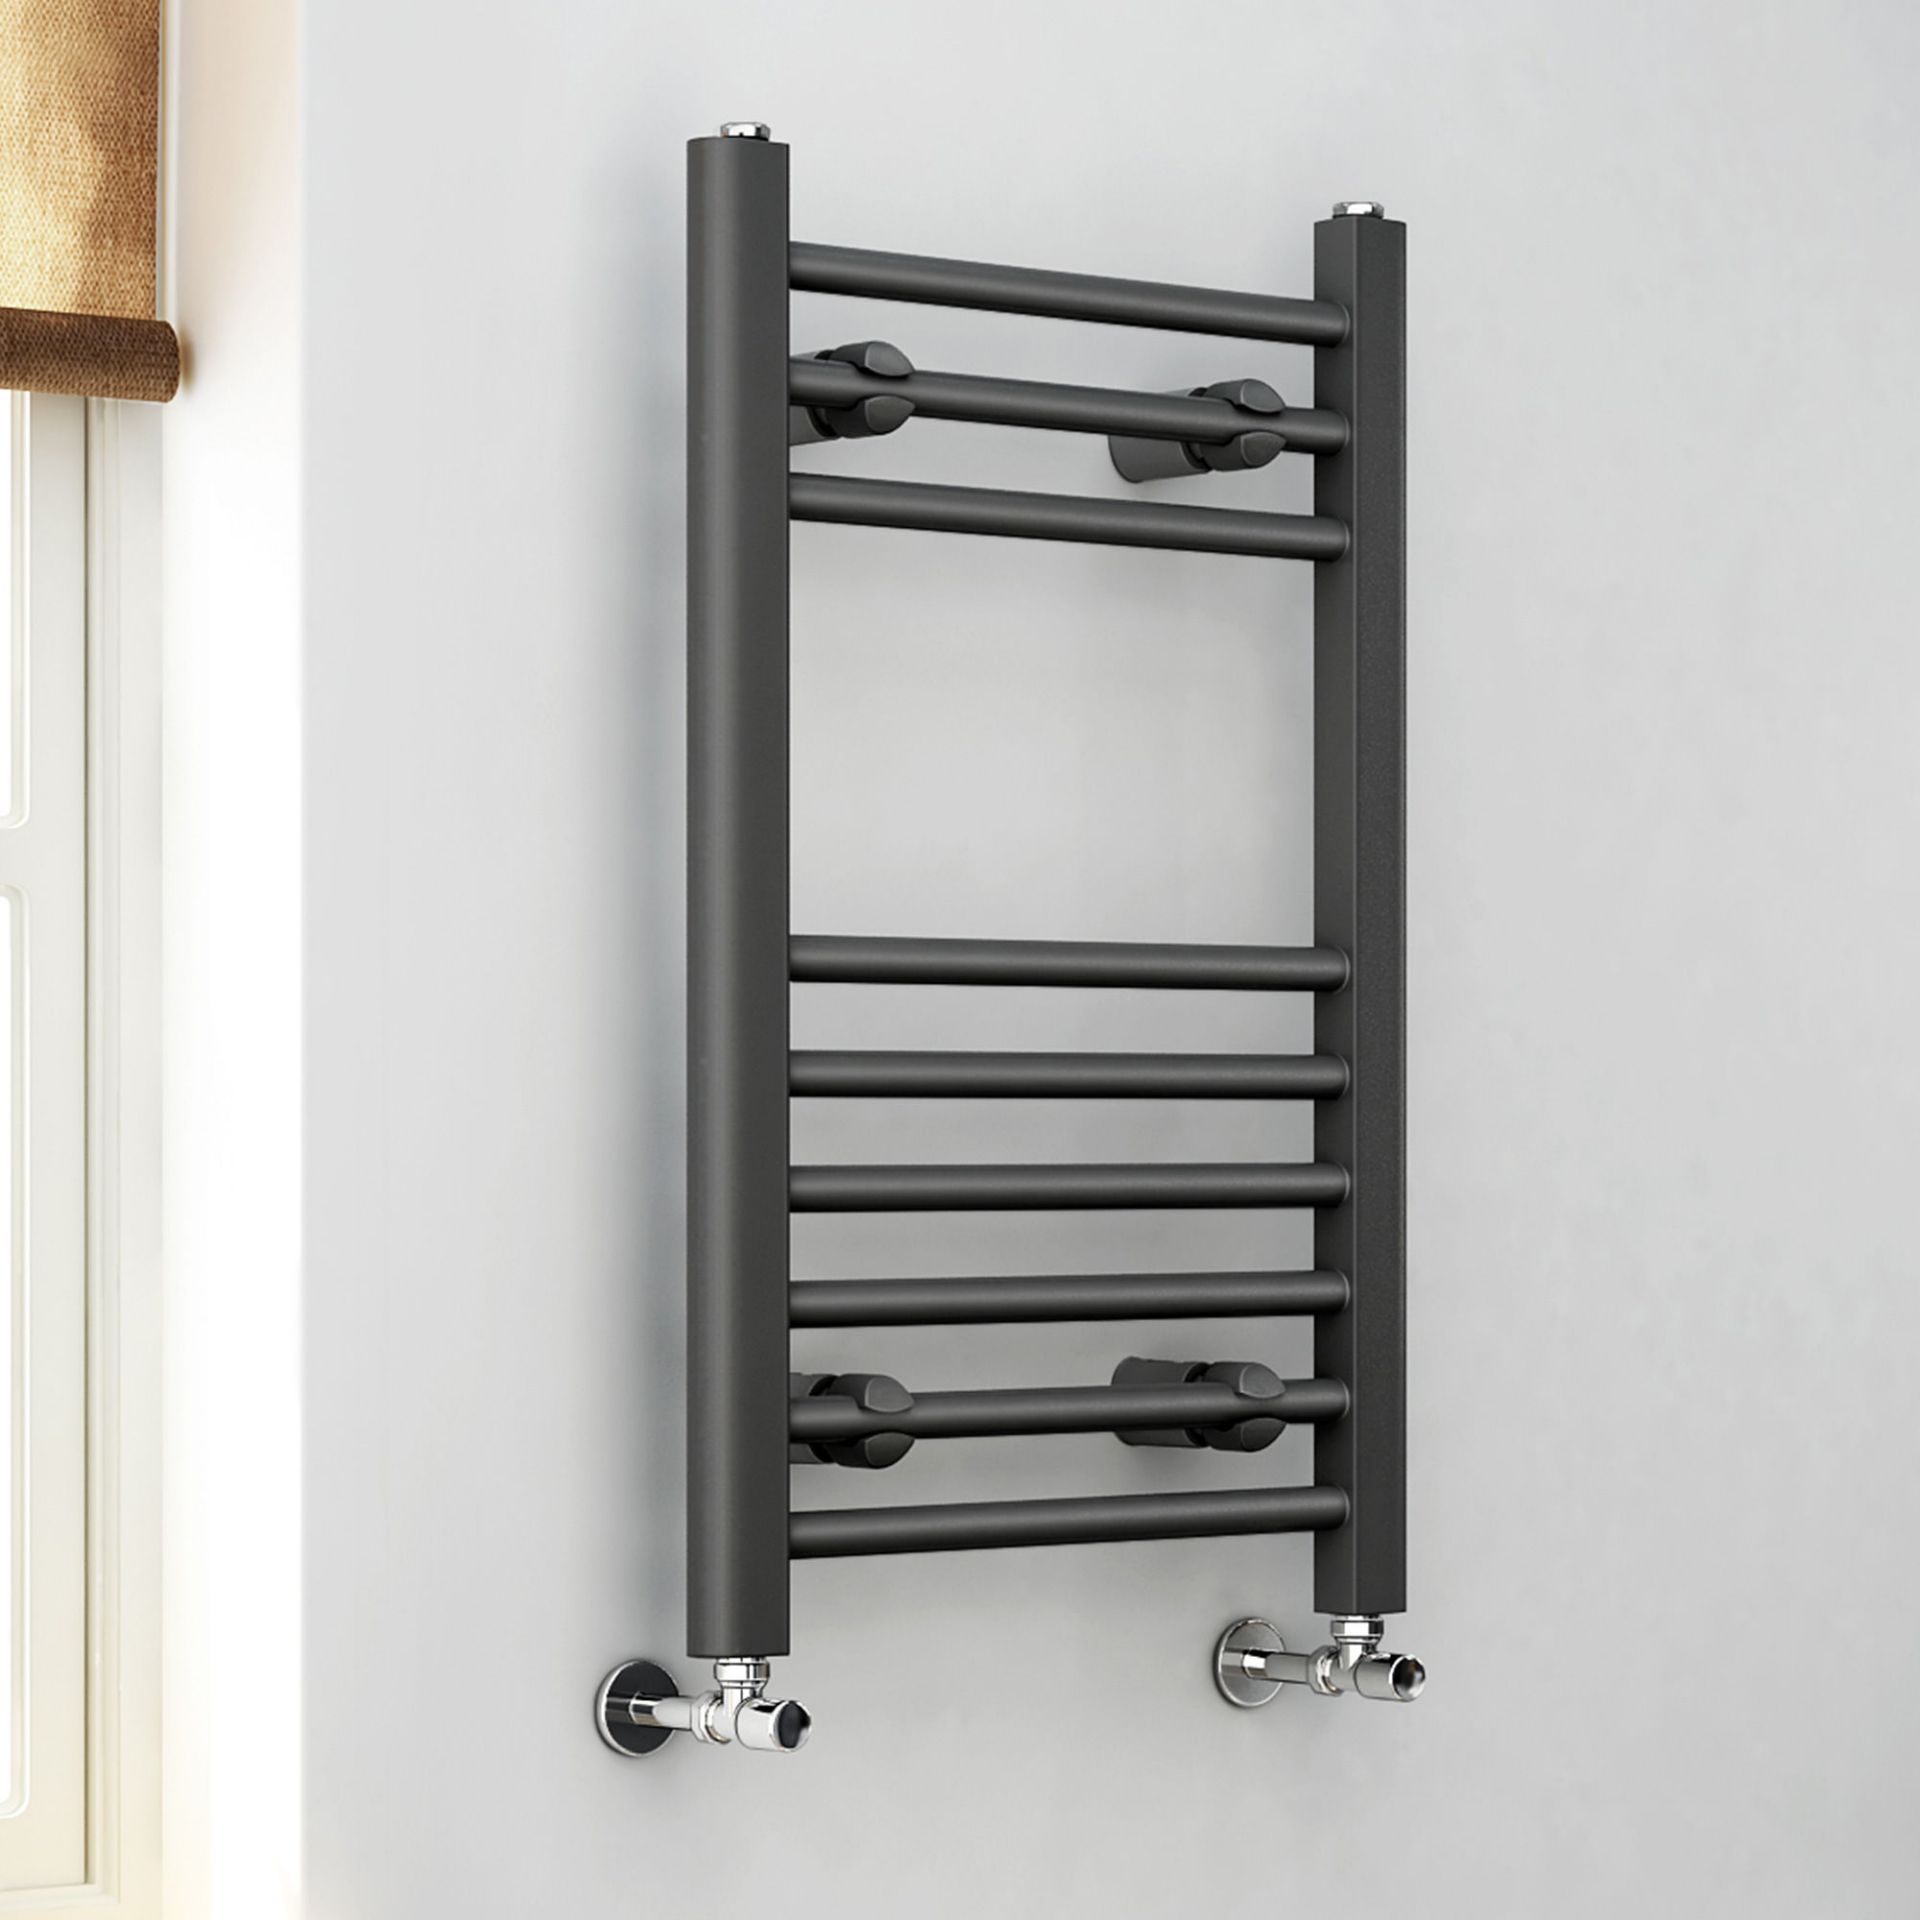 (TY77) 650x400mm - 20mm Tubes - Anthracite Heated Straight Rail Ladder Towel Radiator. Corrosion